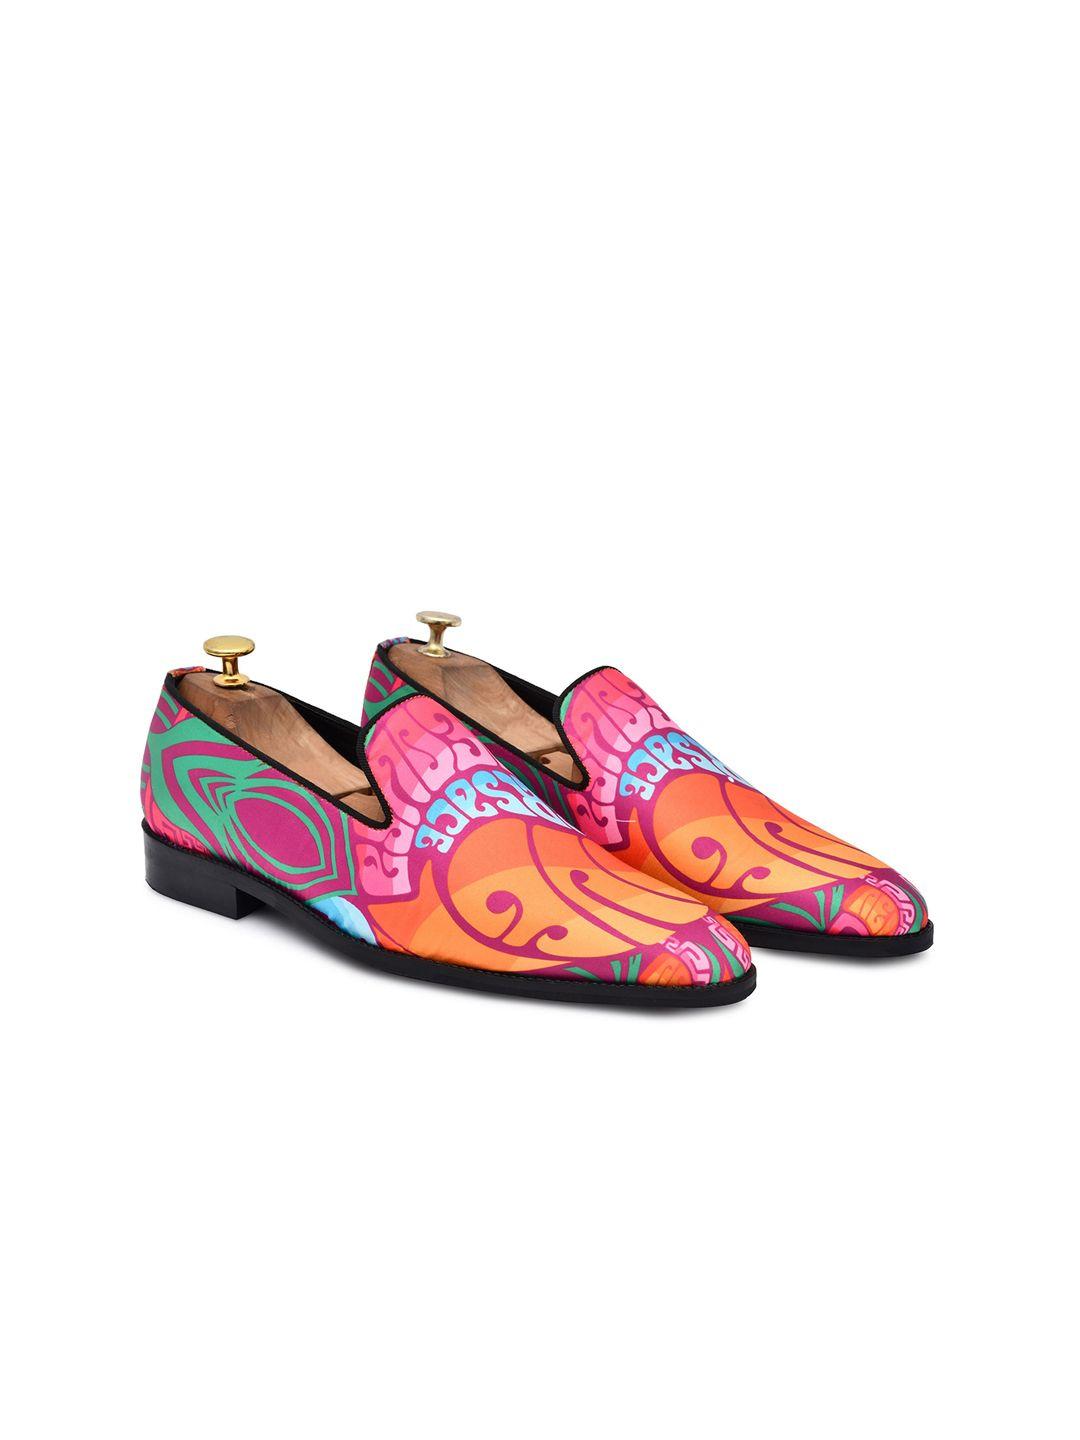 griffin men multicoloured printed loafers